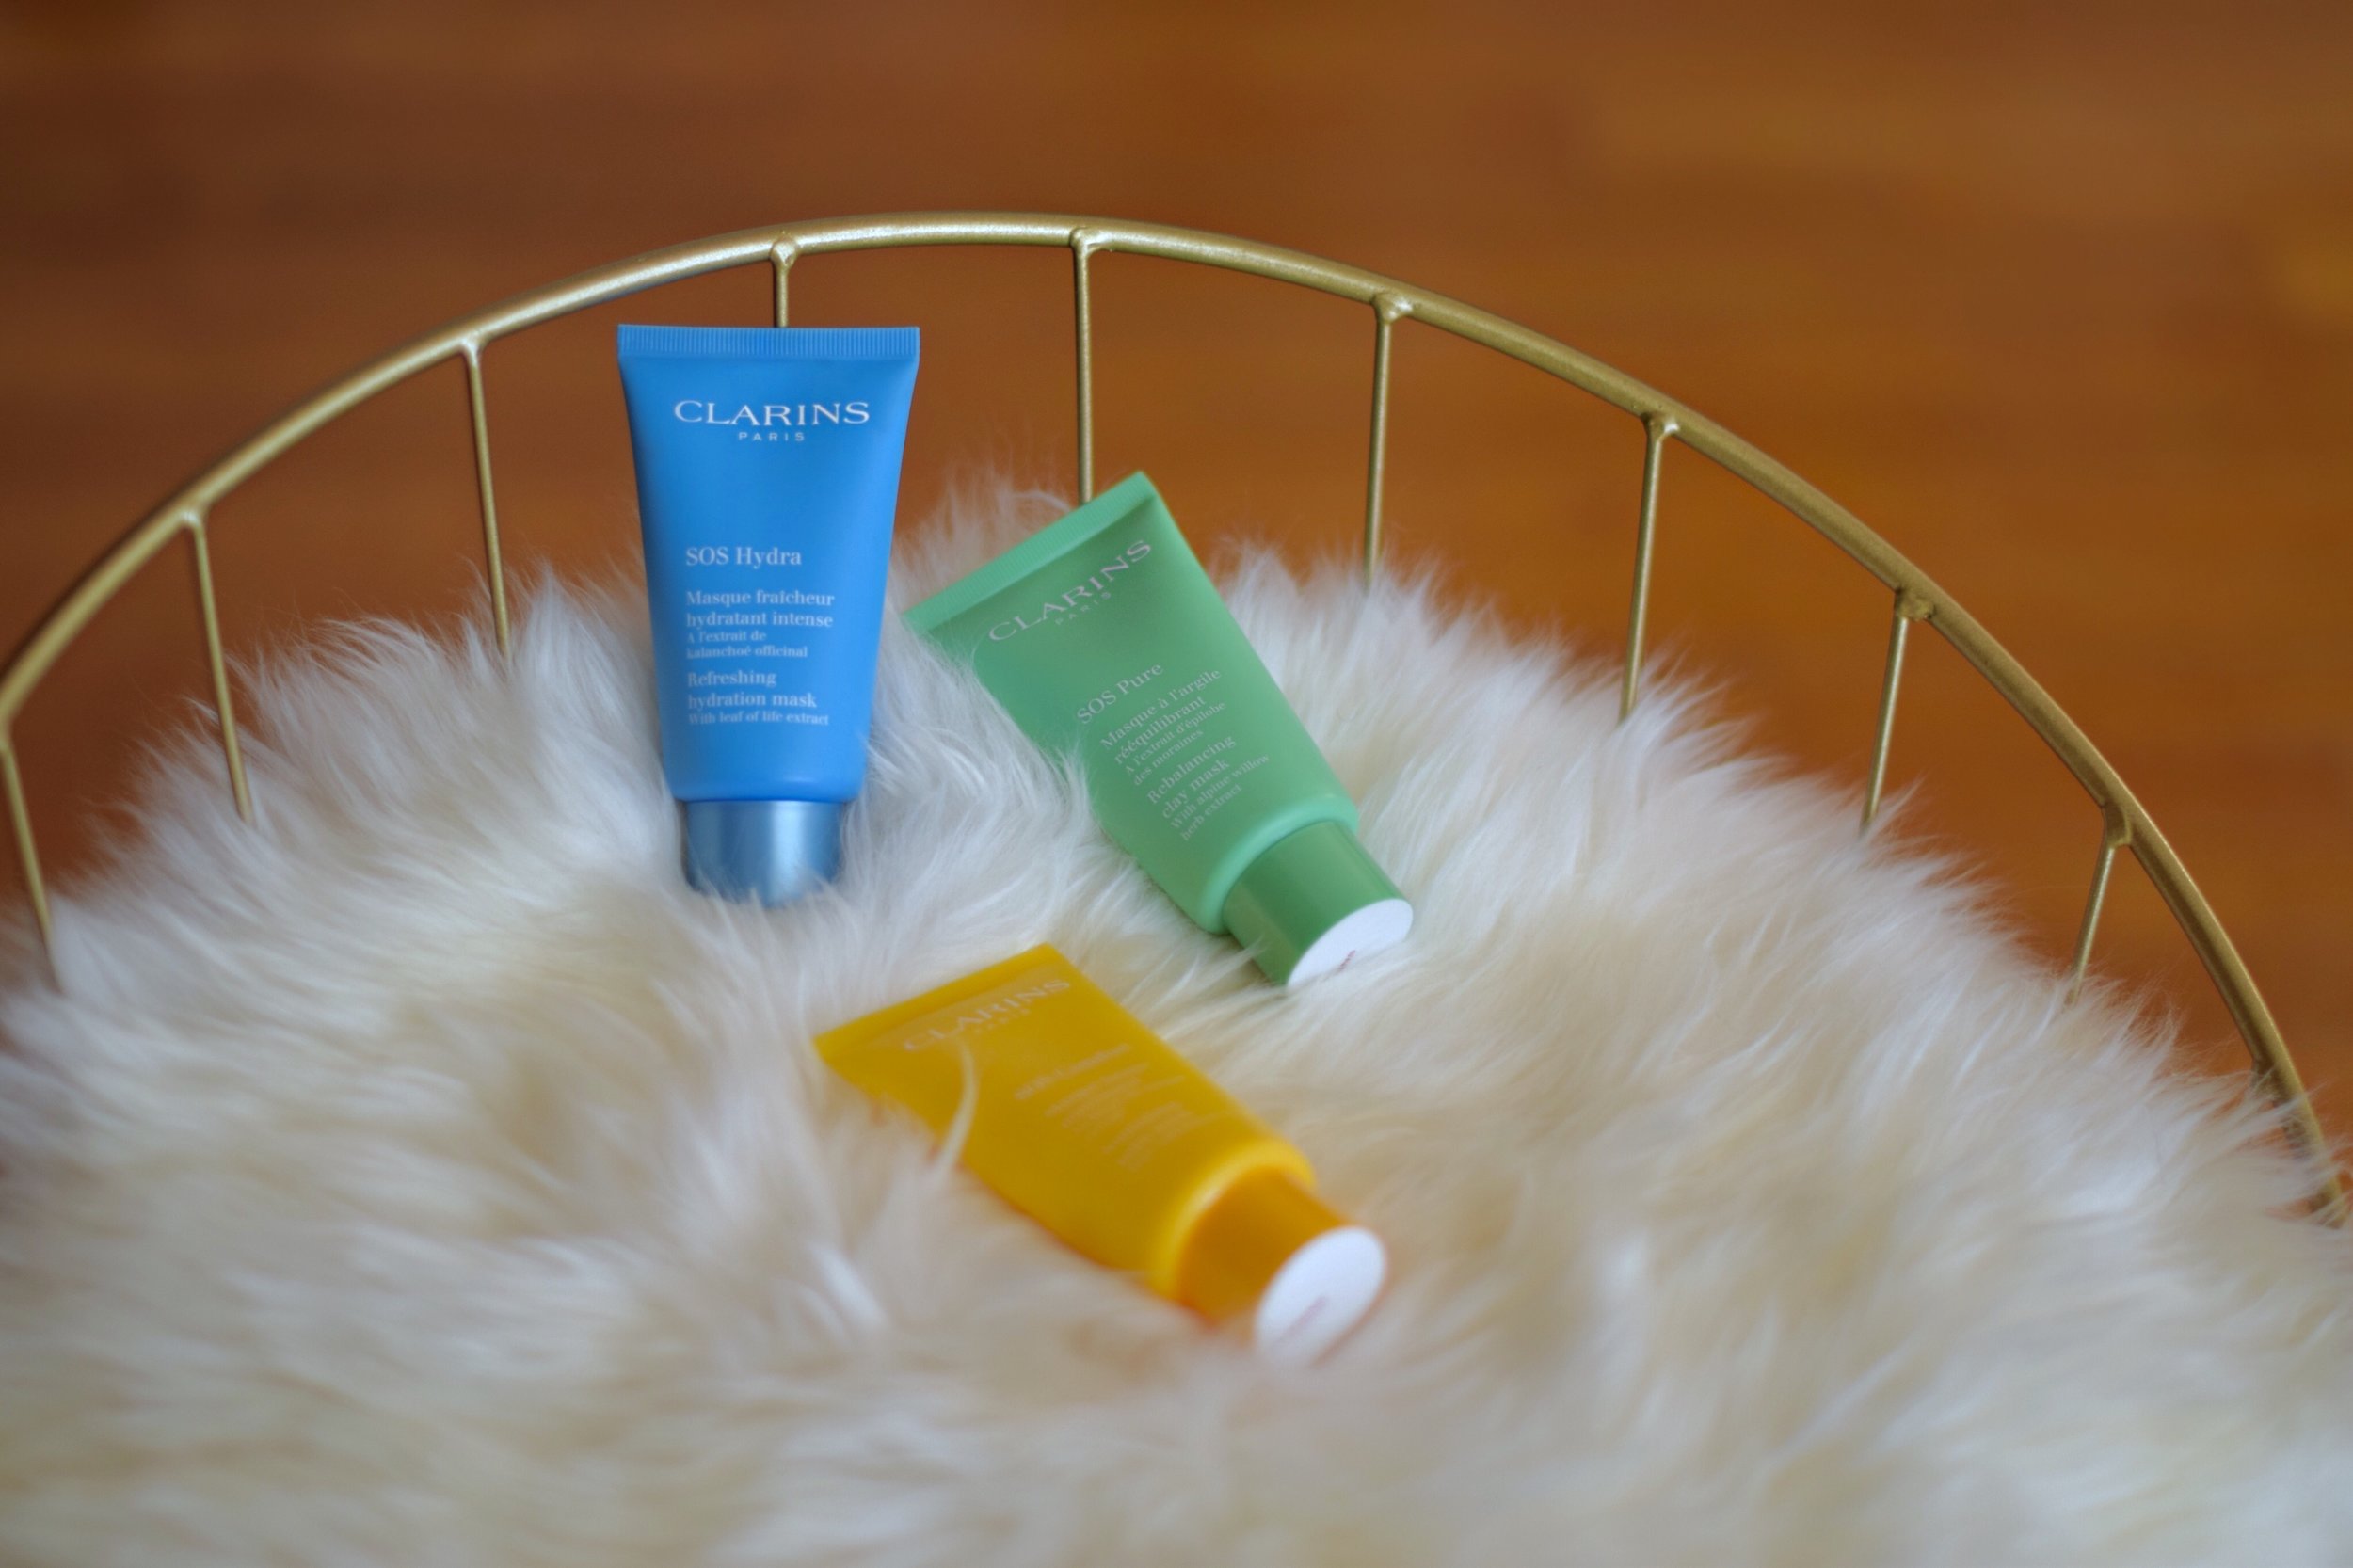 SOS Face Masks Clarins Esther Santer Fashion Blog NYC Street Style Blogger Outfit OOTD Trendy Beauty Product Review Colorful Blue Green Yellow Bottle Moisturize Masque Rebalancing Shop Skincare Skin Routine Comfort Girl Women New York City  Hydrate.jpg